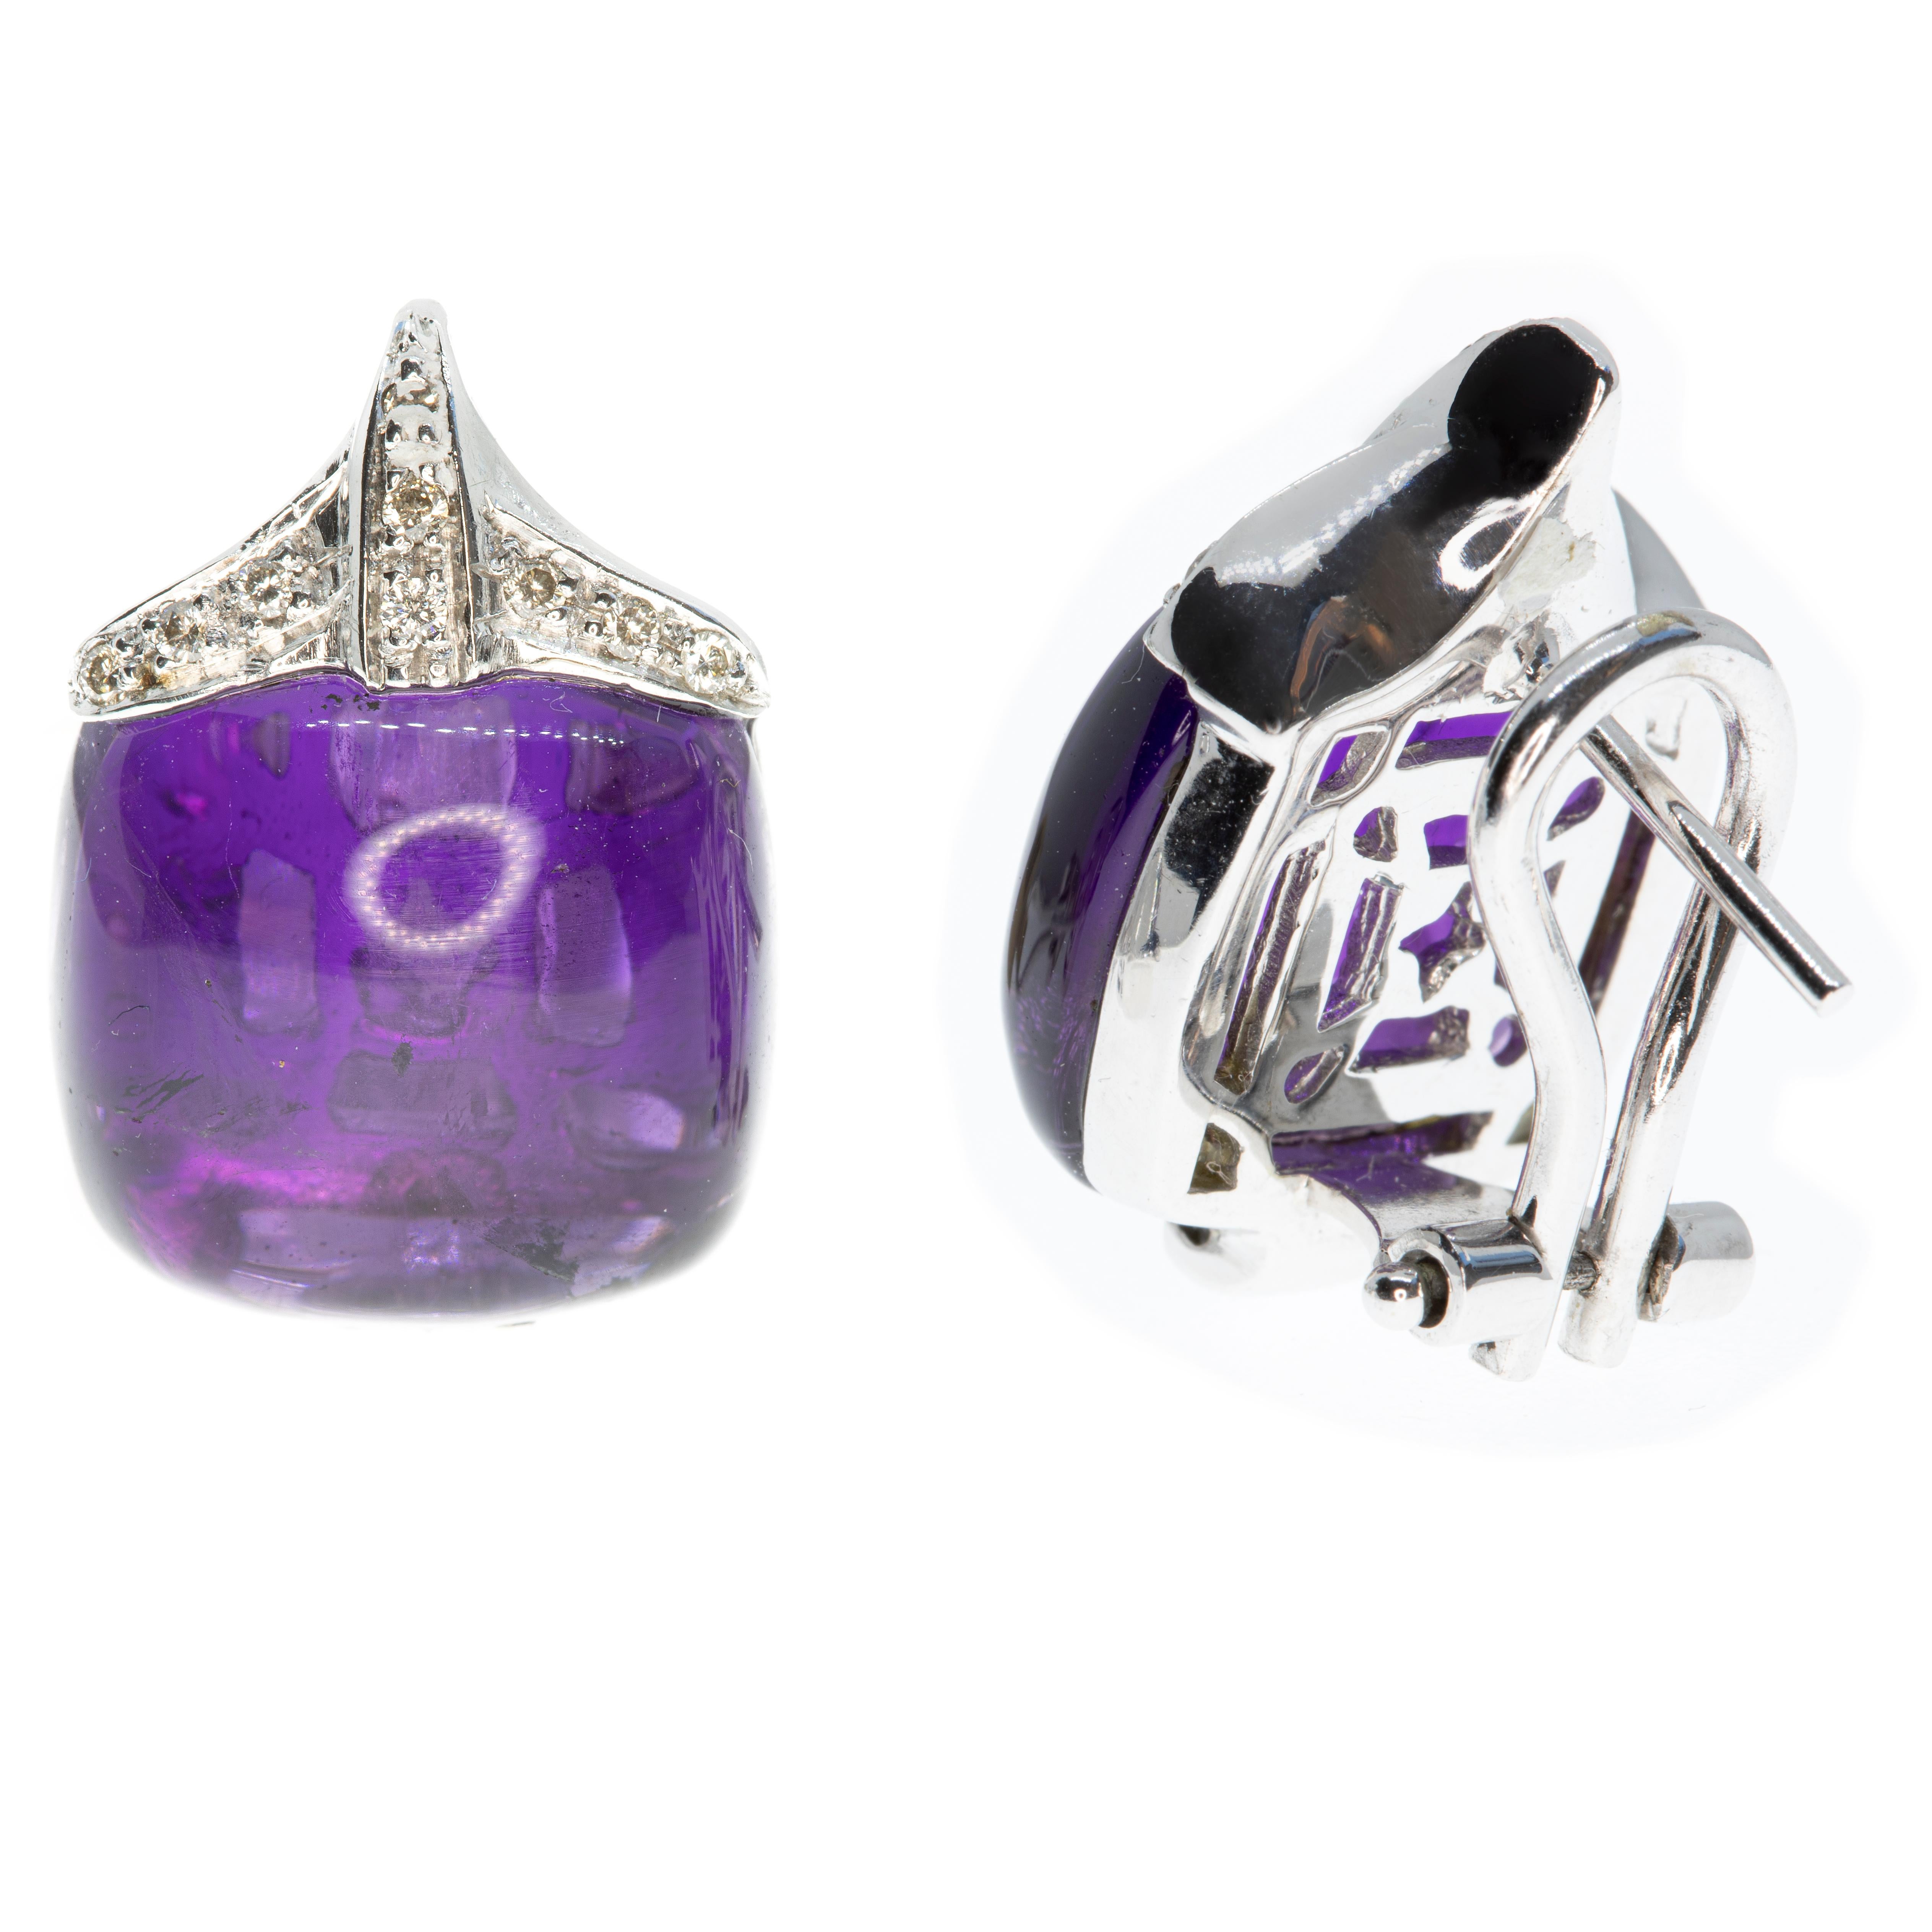 Modern Contemporary 18 Karat White Gold Amethyst and White Pavé Diamond Drop Earrings For Sale